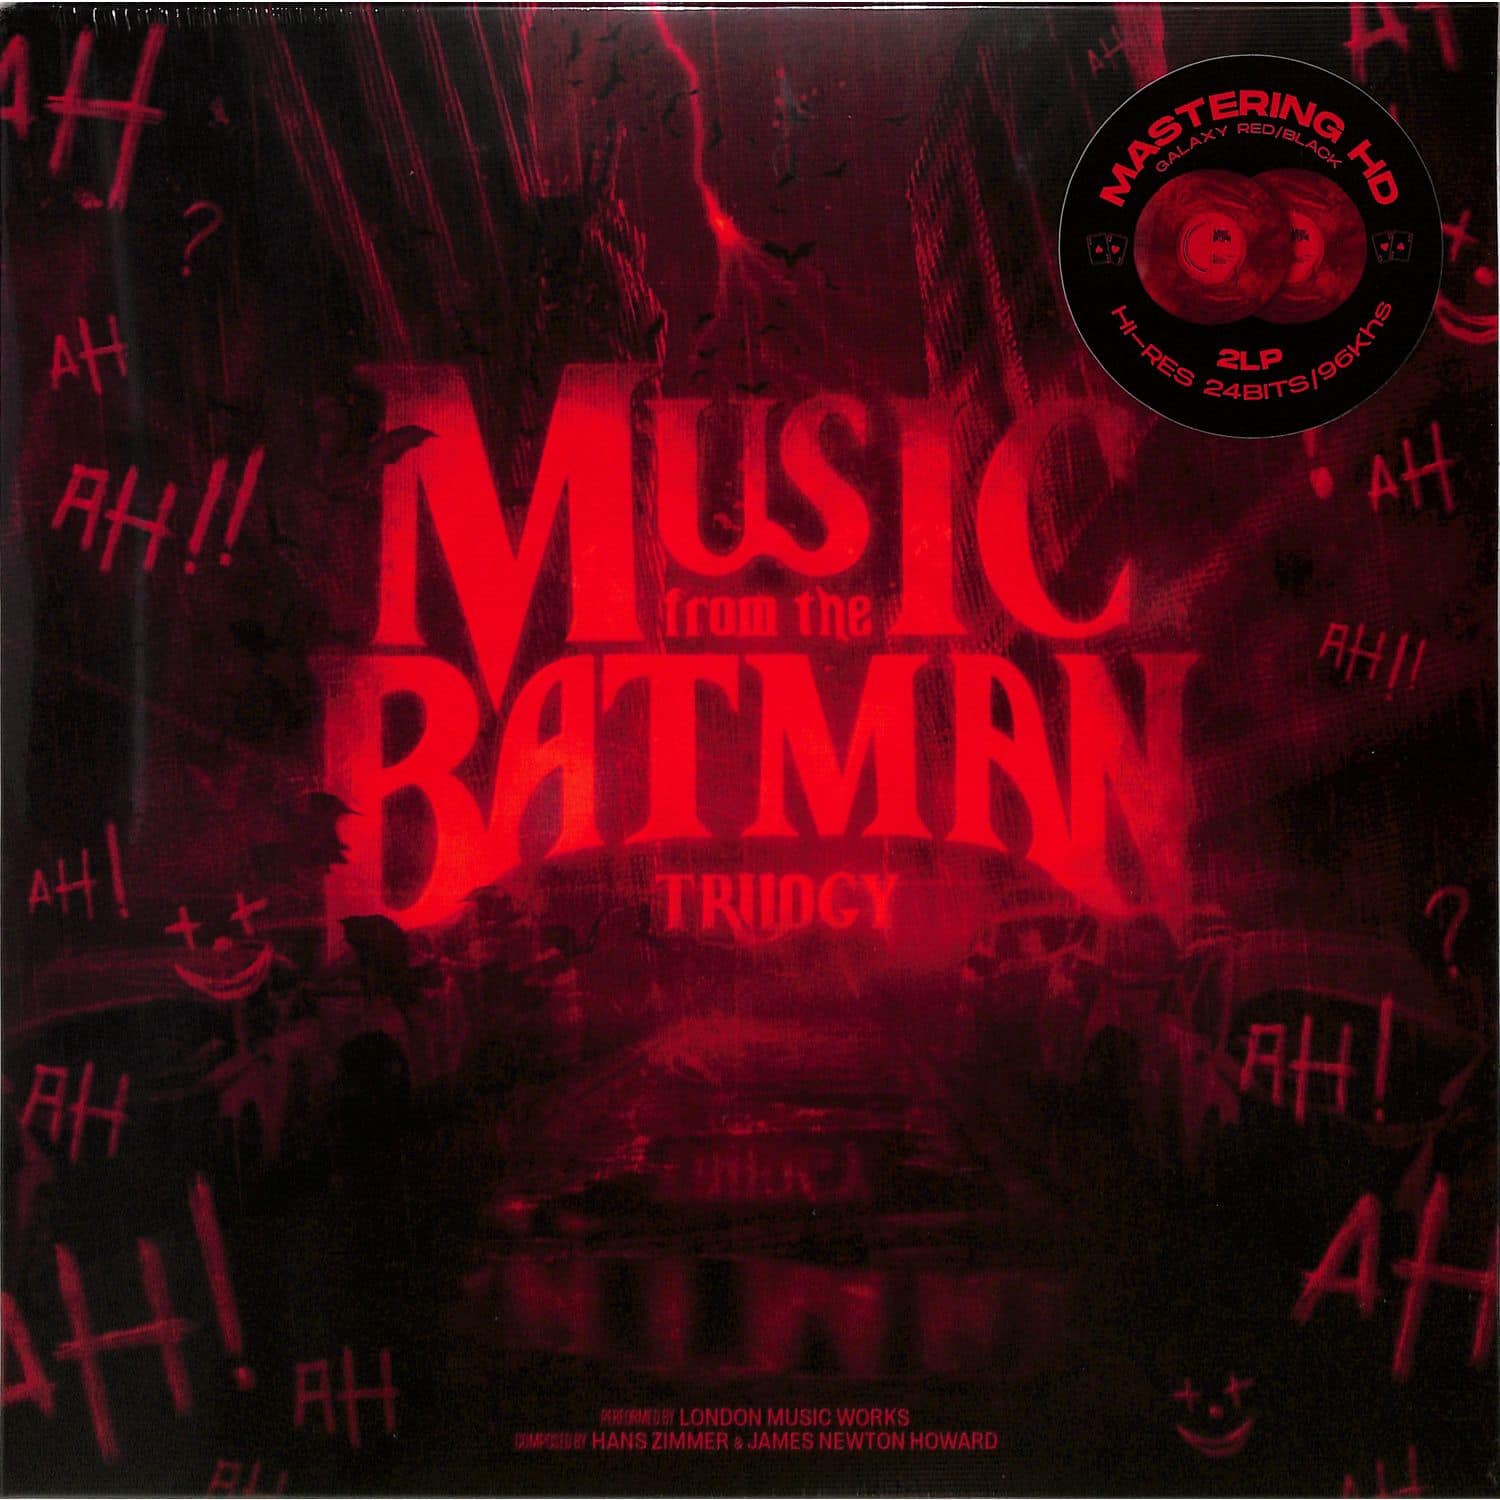 London Music Works - MUSIC FROM THE BATMAN TRILOGY 